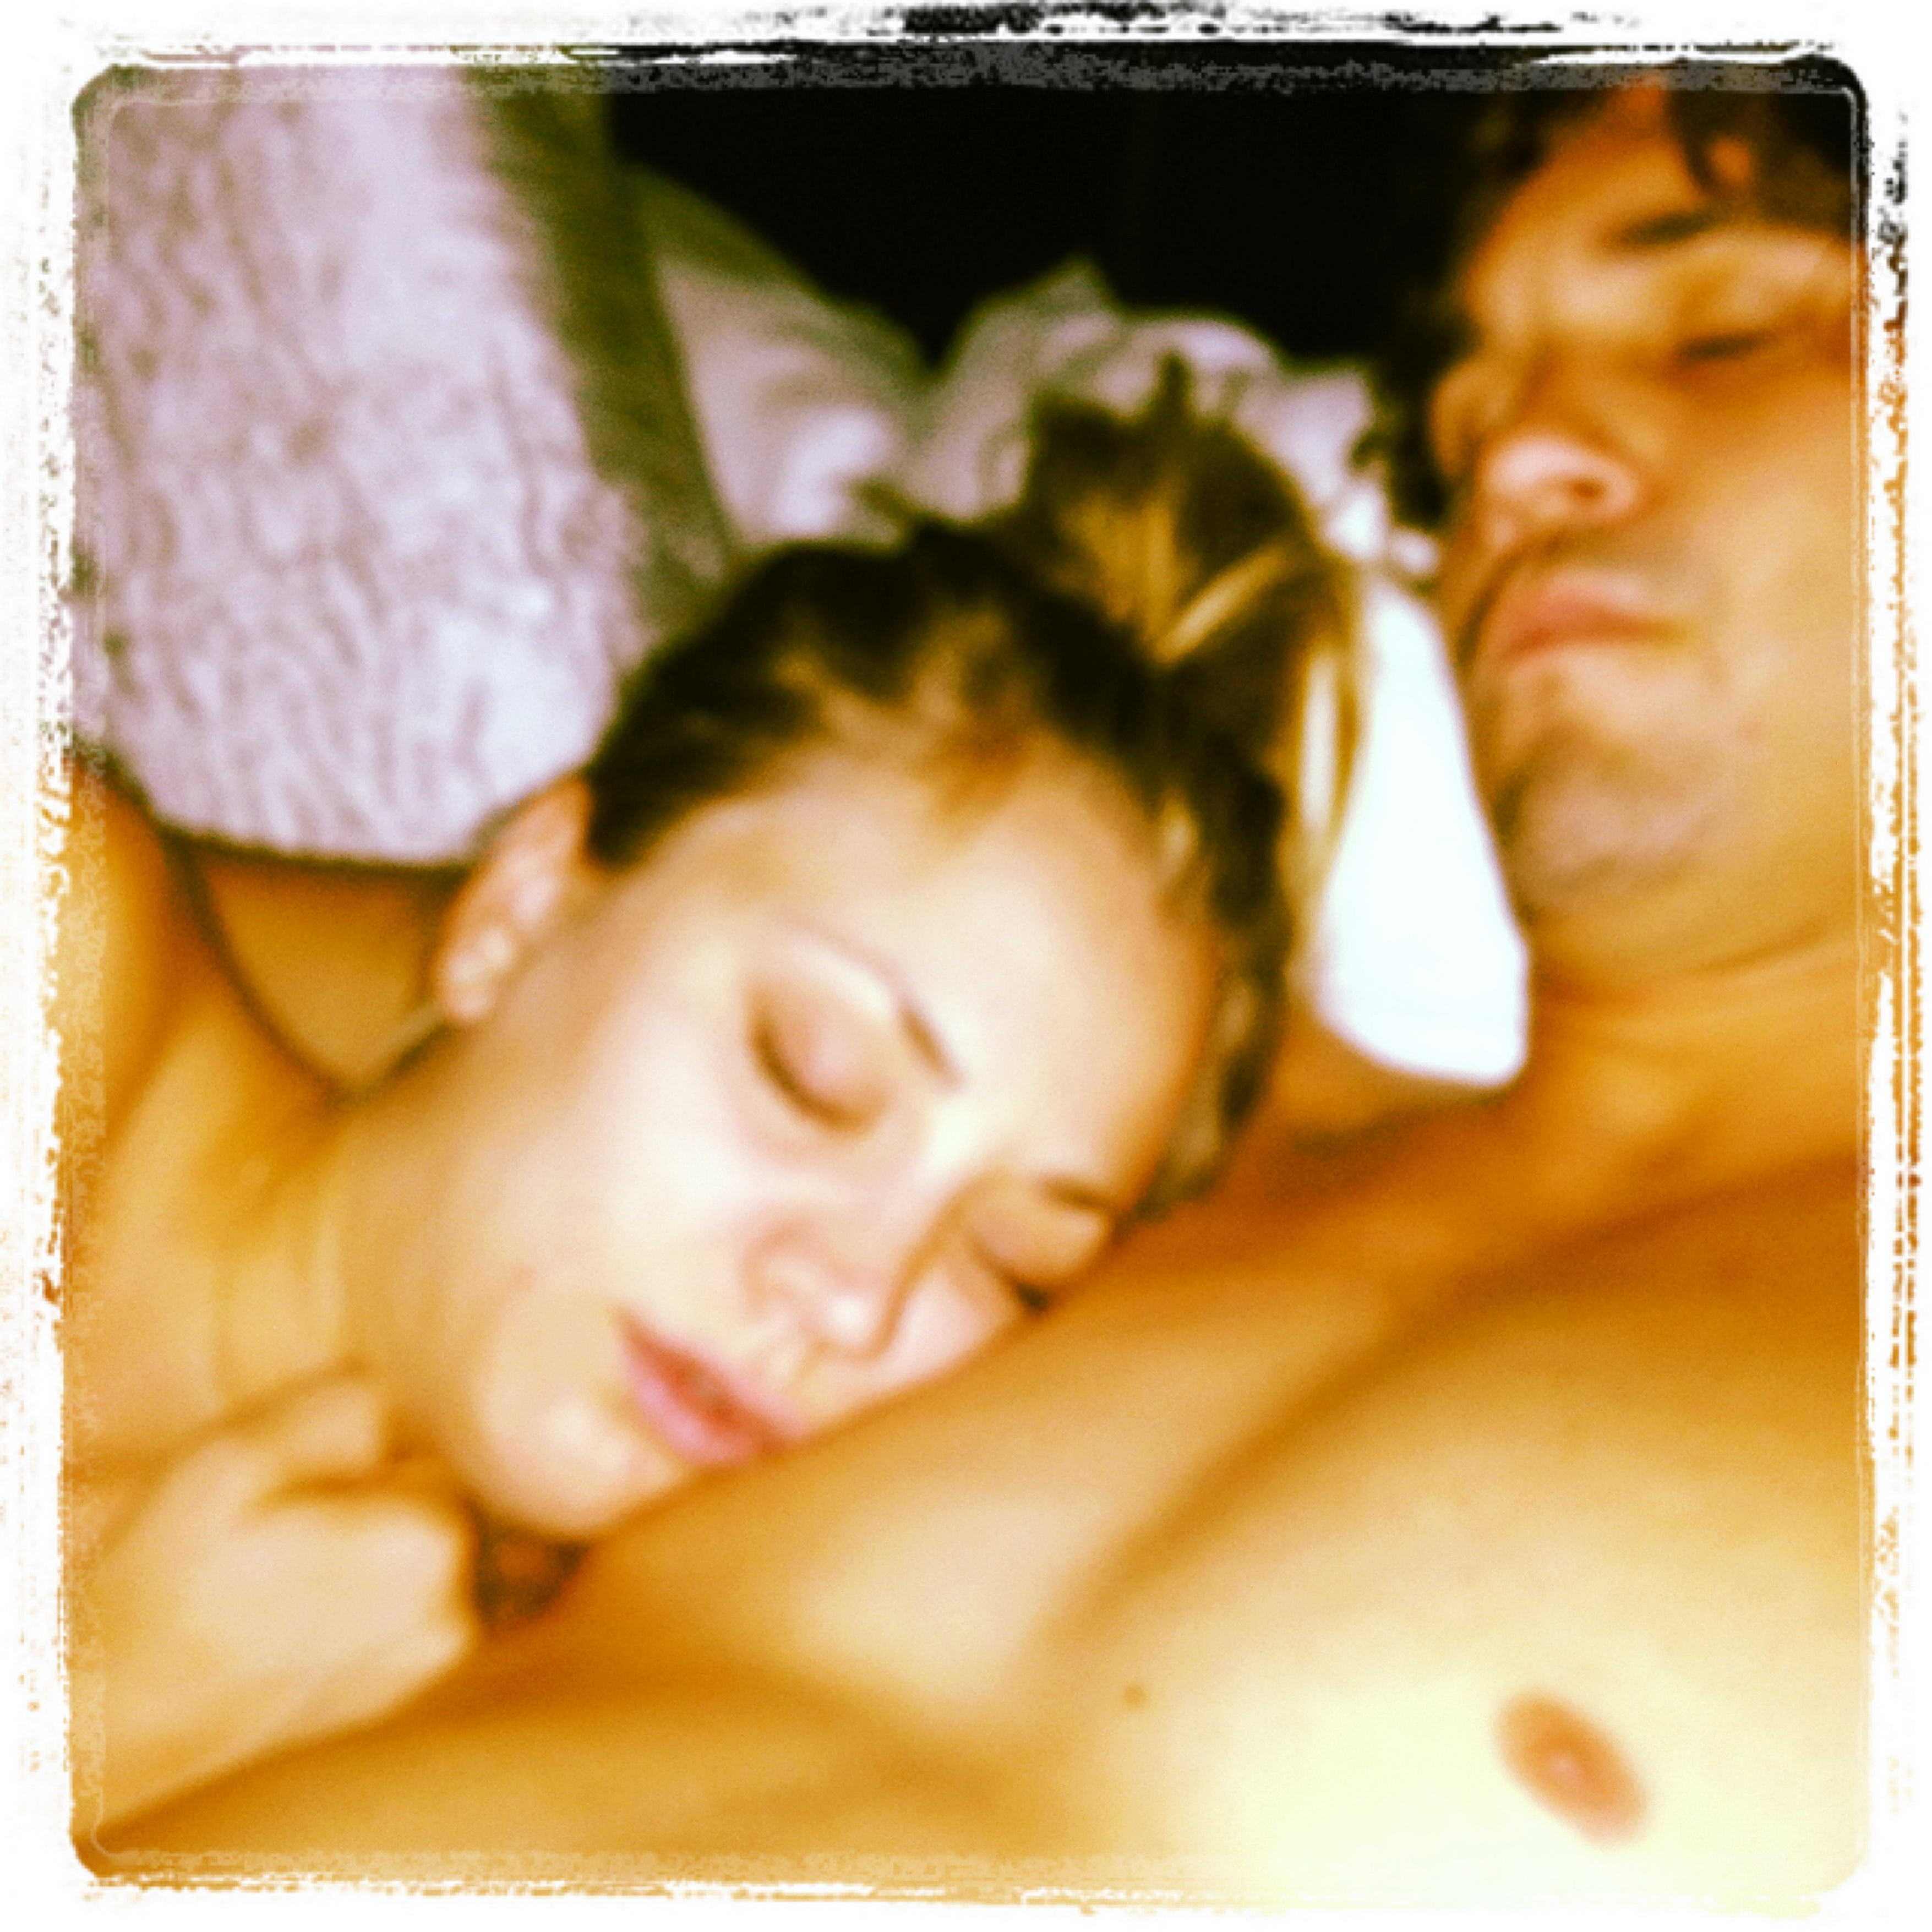 Kaley_Cuoco_leaked_private_nude_photo_and_video_hacked_personal_naked_pics_46x_MixQ_23.JPG